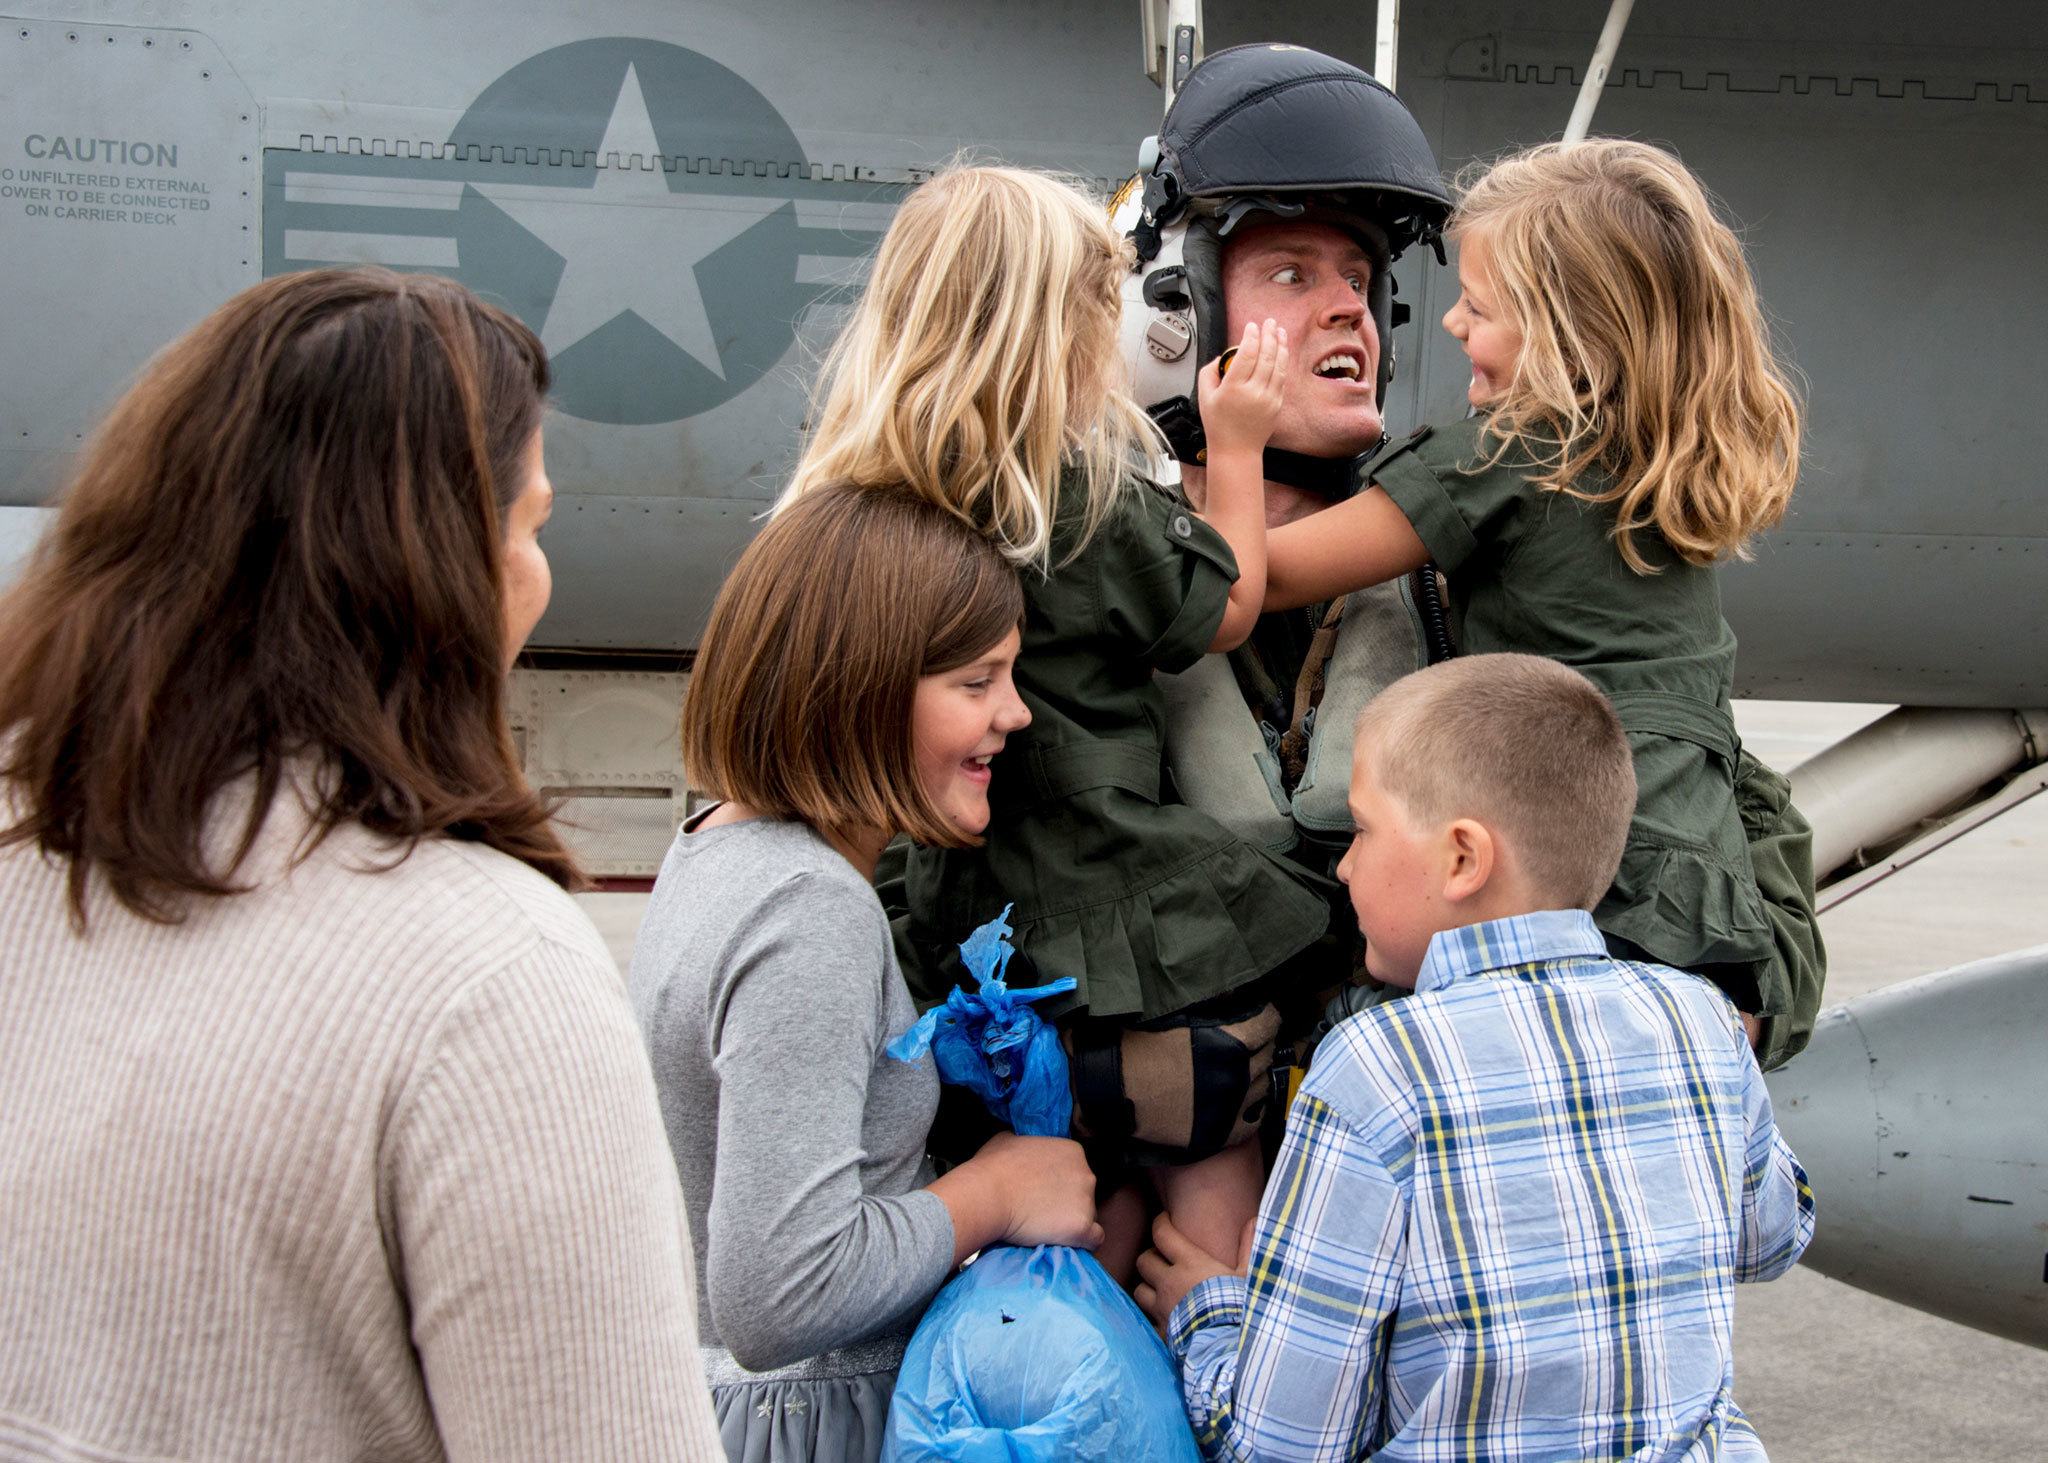 Navy pilot Daniel Cochran greets his children after returning from a mission. COURTESY PHOTO, U.S. Navy Petty Officer 3rd Class Matthew C. Duncker